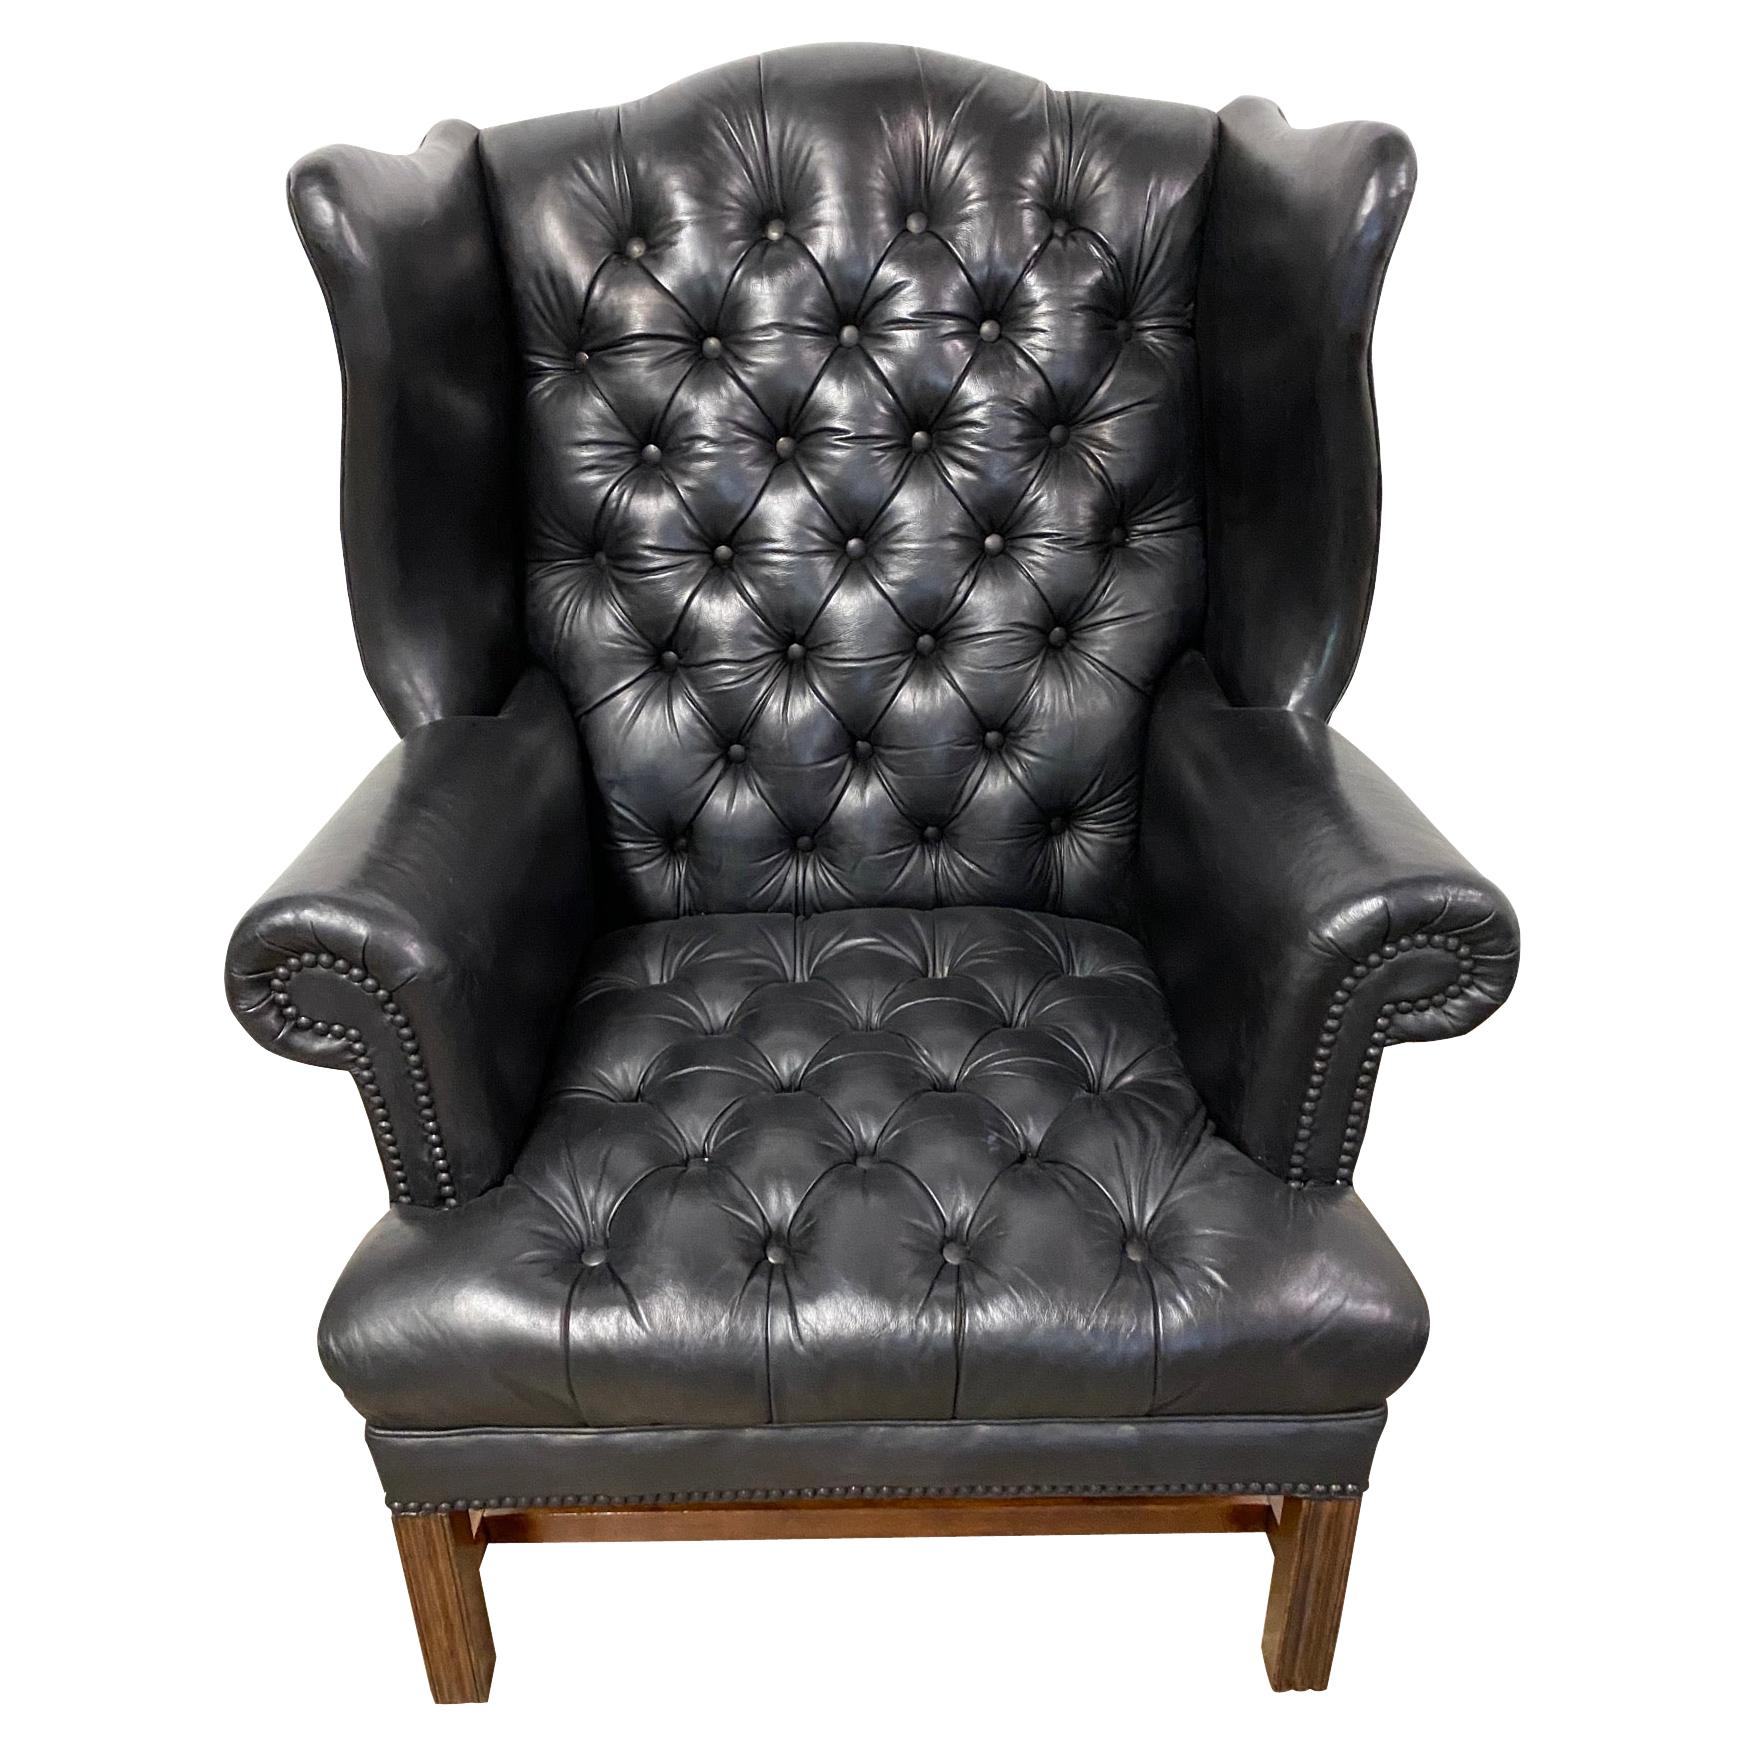 George III Style Black Leather Chesterfield Tufted Wing Chair